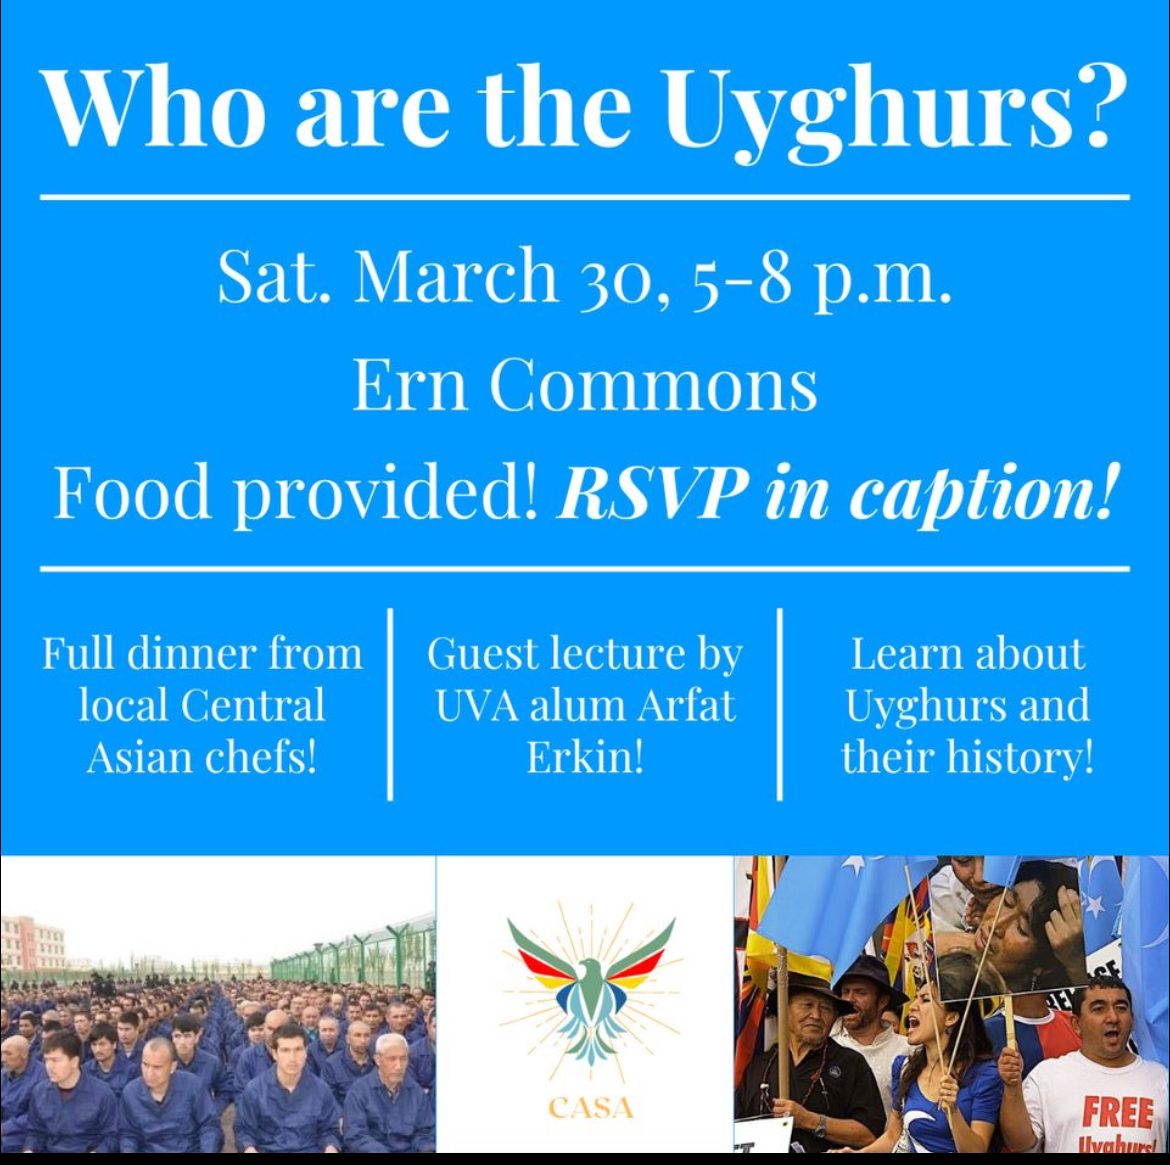 Interested in Xinjiang or like Central Asian food? @UVA's Central Asian Student Association is hosting UVA alum and Uyghur Arfat Erkin this Saturday!